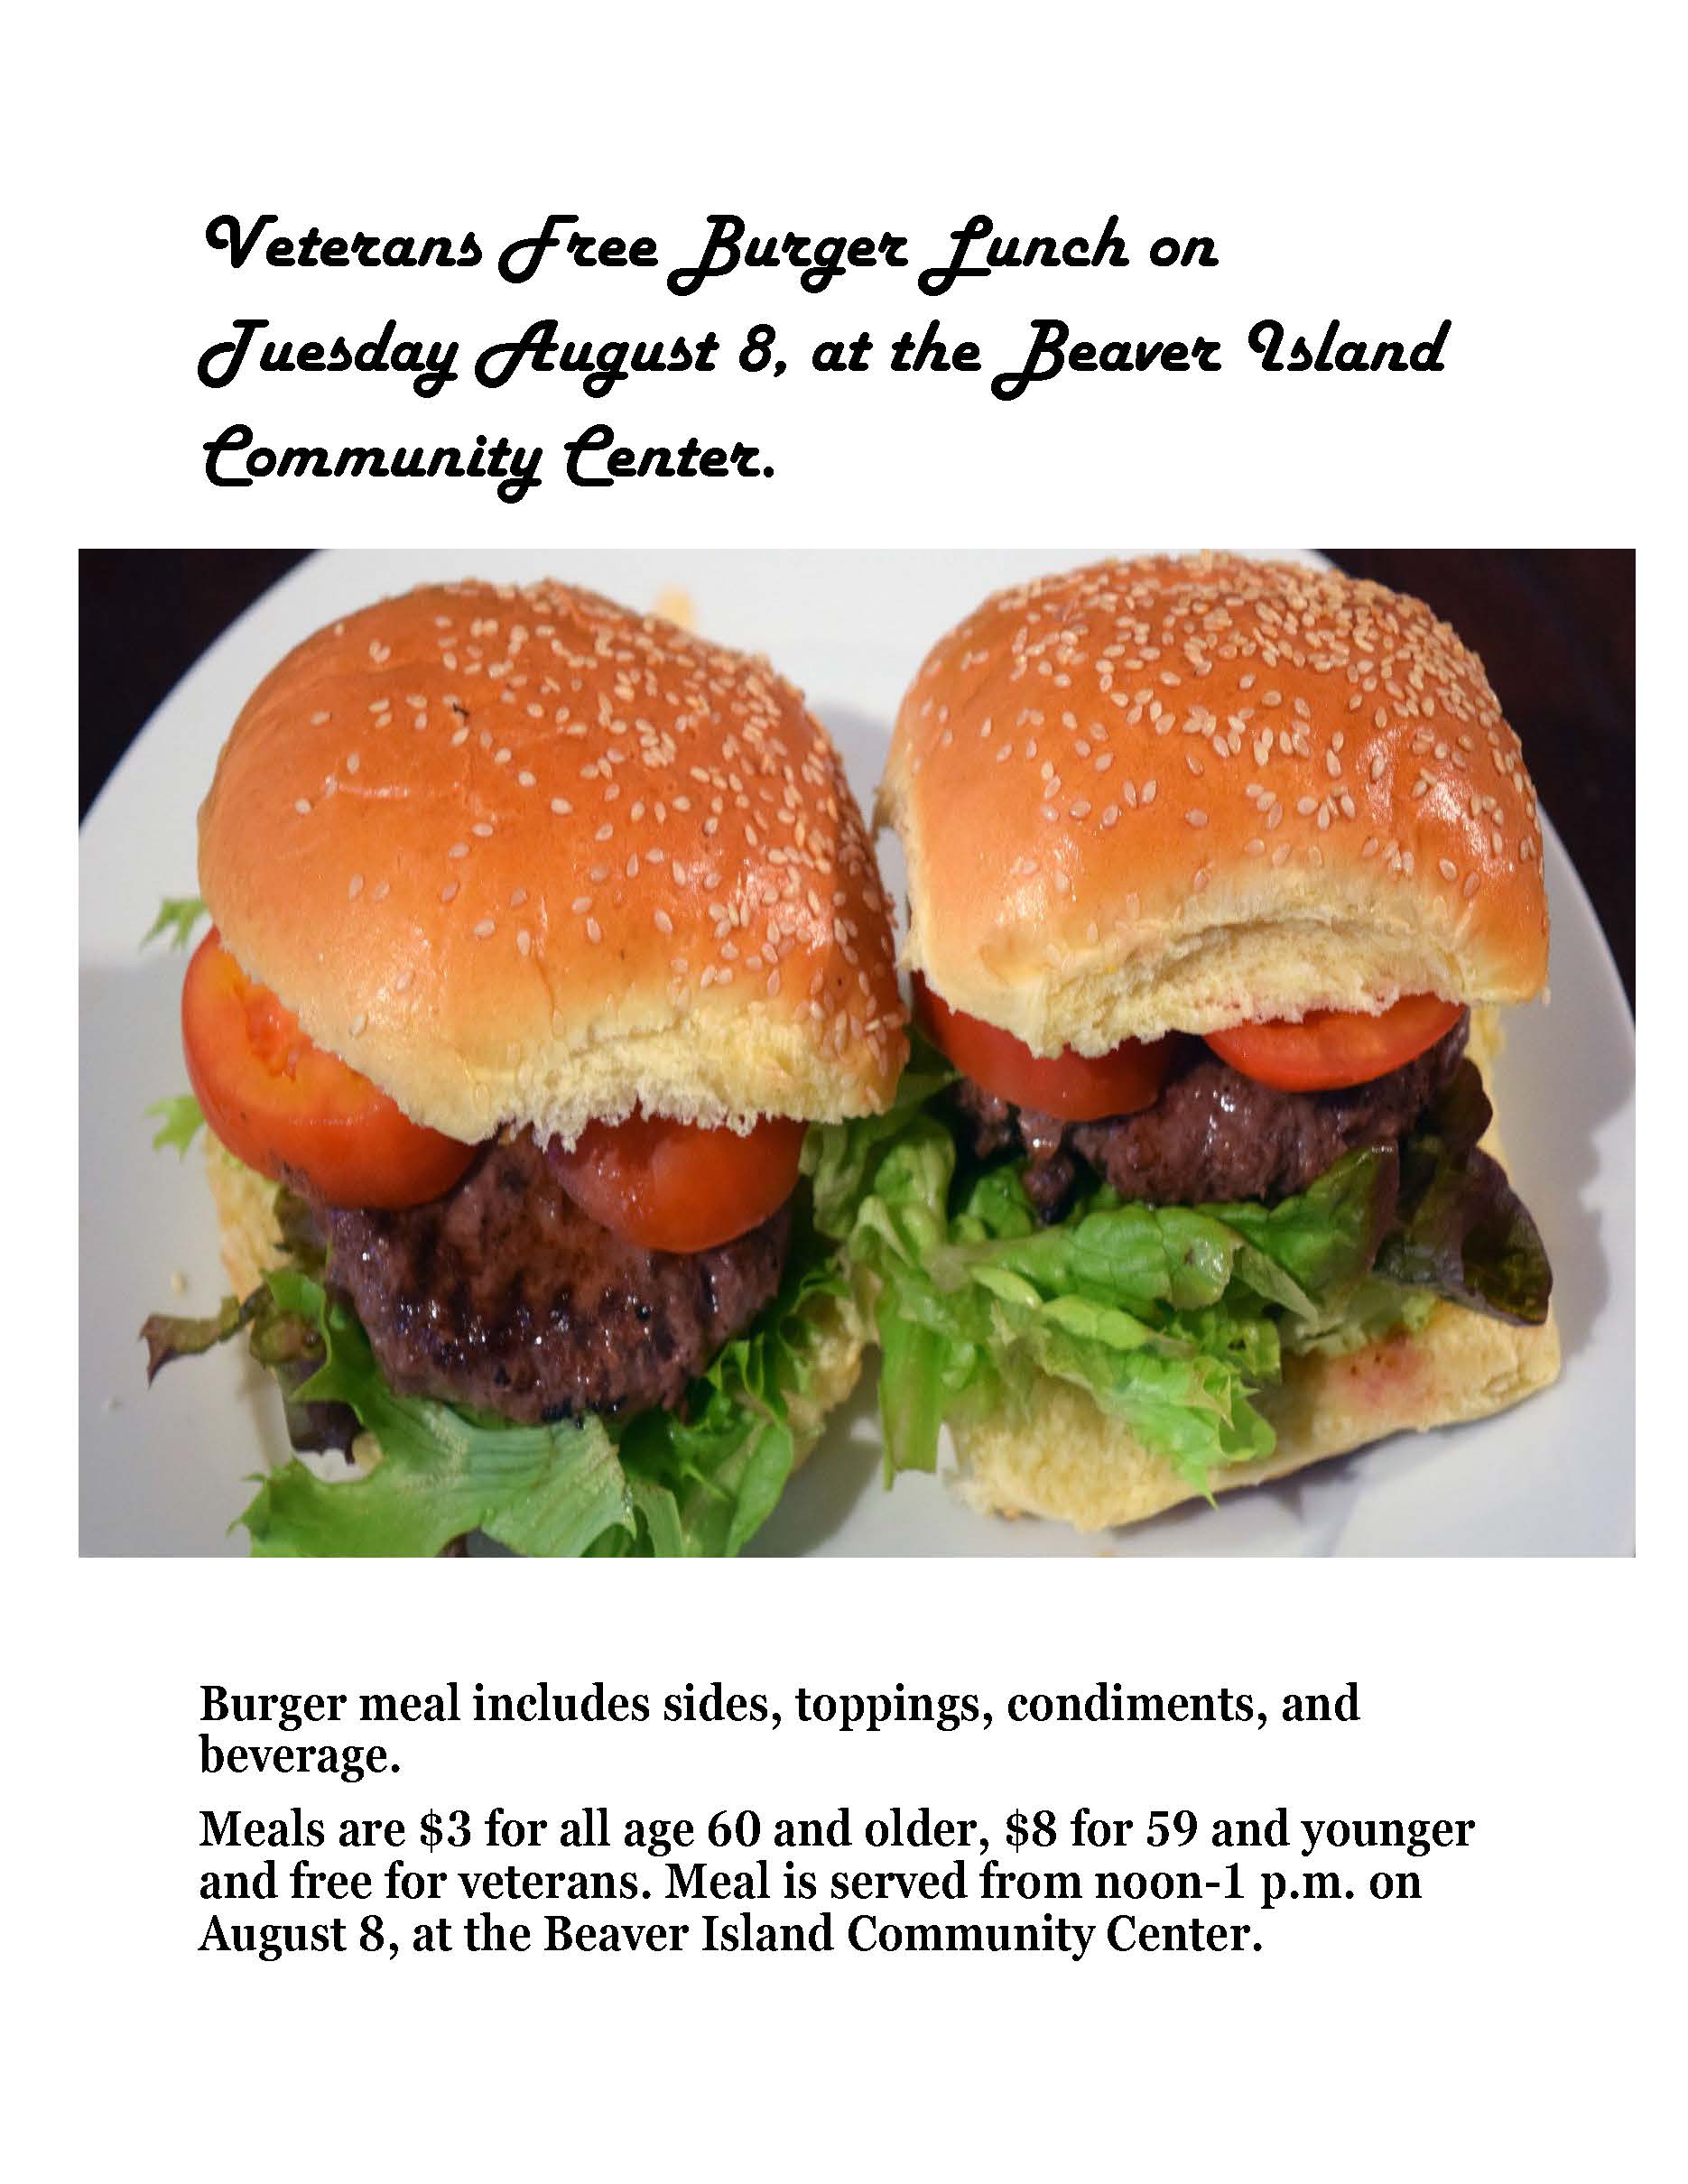 Veterans Free Burger Lunch on Tuesday August 8.jpg